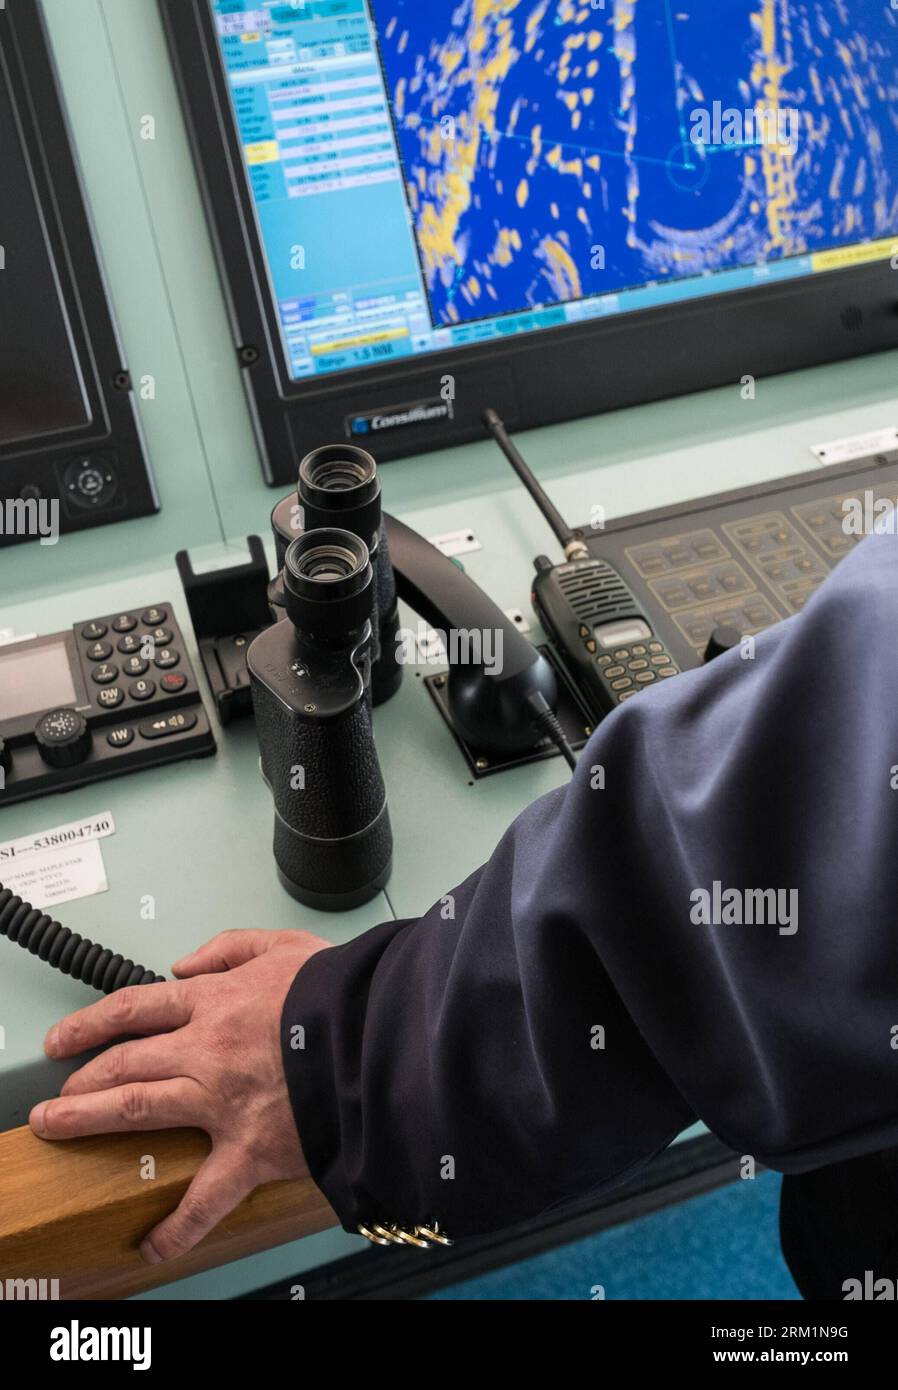 Bildnummer: 59604369  Datum: 24.04.2013  Copyright: imago/Xinhua NANJING, - Wang Lianmiao monitors a radar screen aboard the Maple Star on the Yangtze River in east China s Jiangsu Province, April 24, 2013. Wang Lianmiao and Zhu Hui arrived at the port of Jingjiang on the morning of April 24, 2013. Both men are inland waterway pilots from the Yangtze River Pilot Centre. Awaiting them was the Maple Star, a 180-meter-long Marshall Islands-flagged cargo ship with a gross register tonnage of over 23,000. Under their pilotage, the Maple Star was to veer 180 degrees and head downstream to the port o Stock Photo